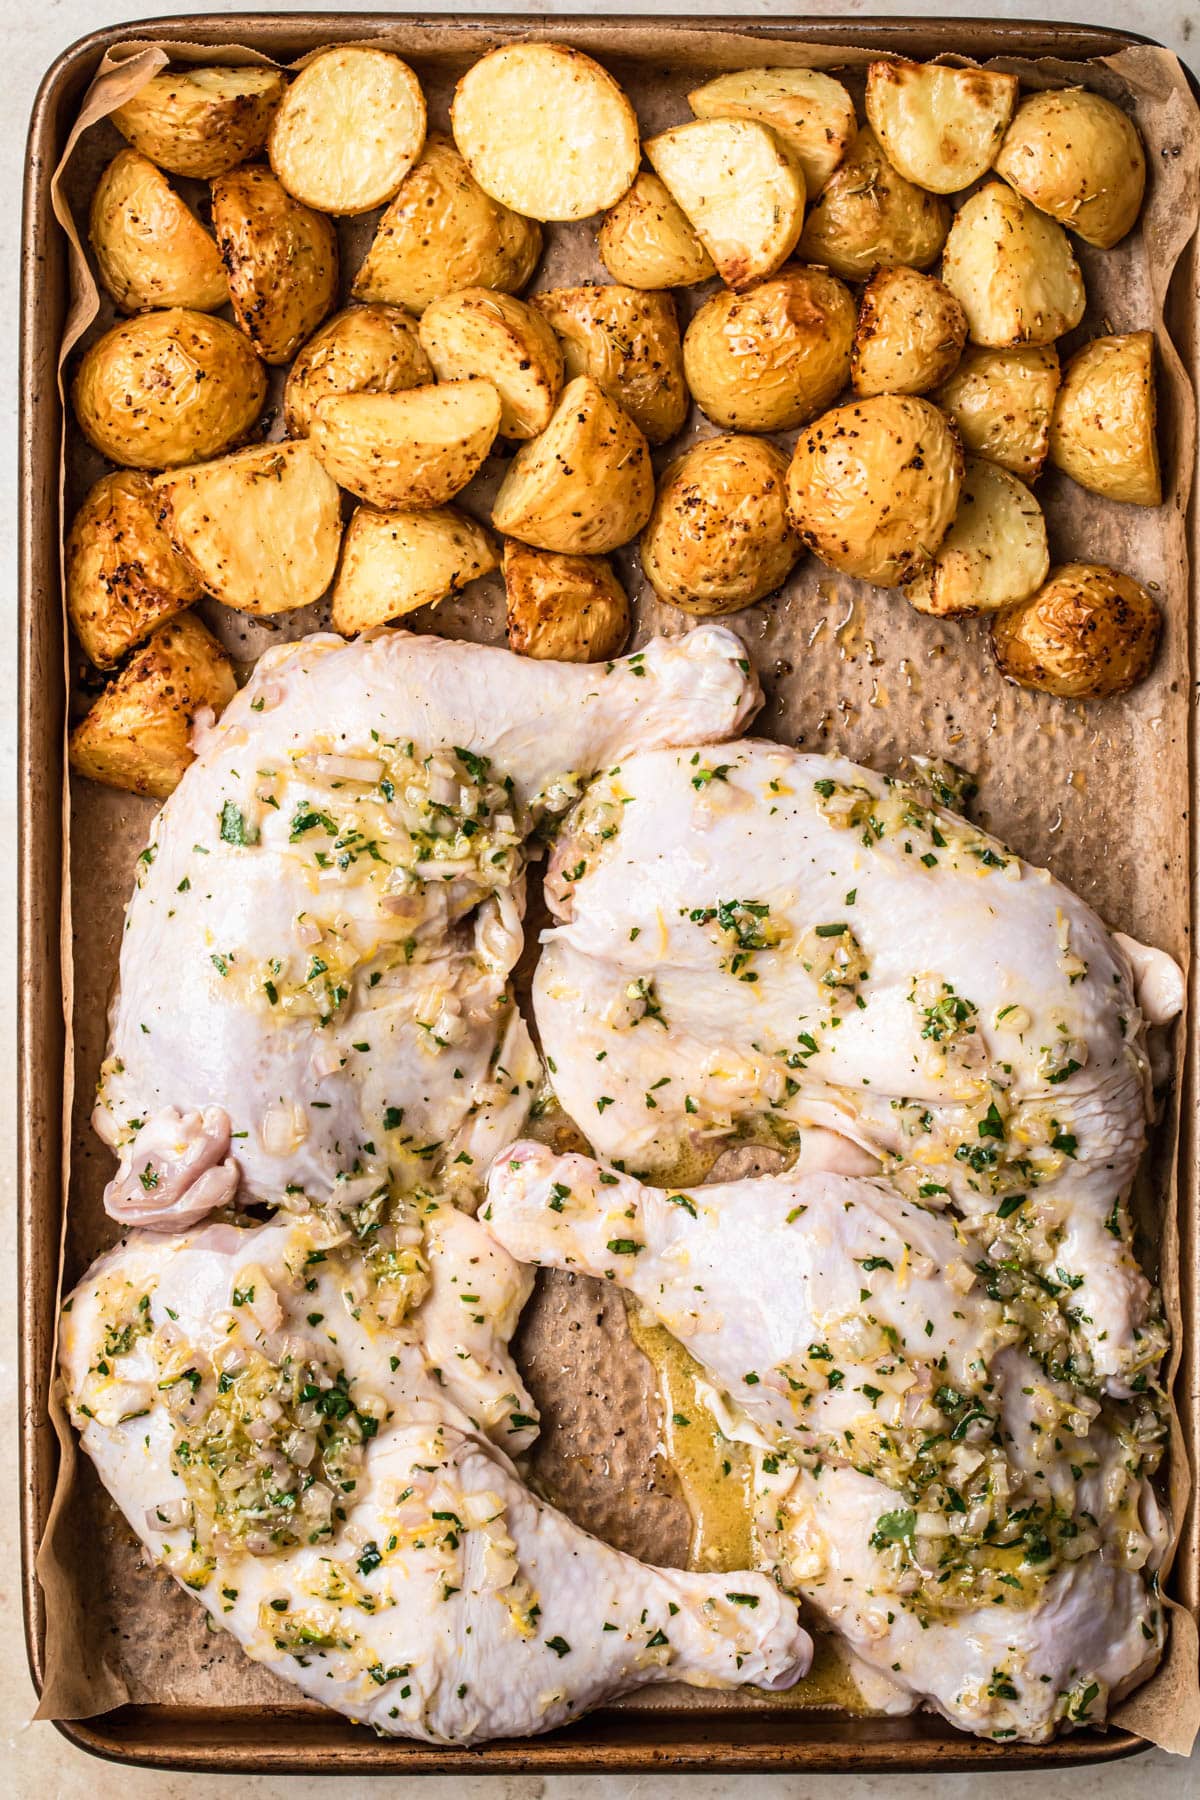 Marinated chicken Marylands added to the tray with baked potatoes.